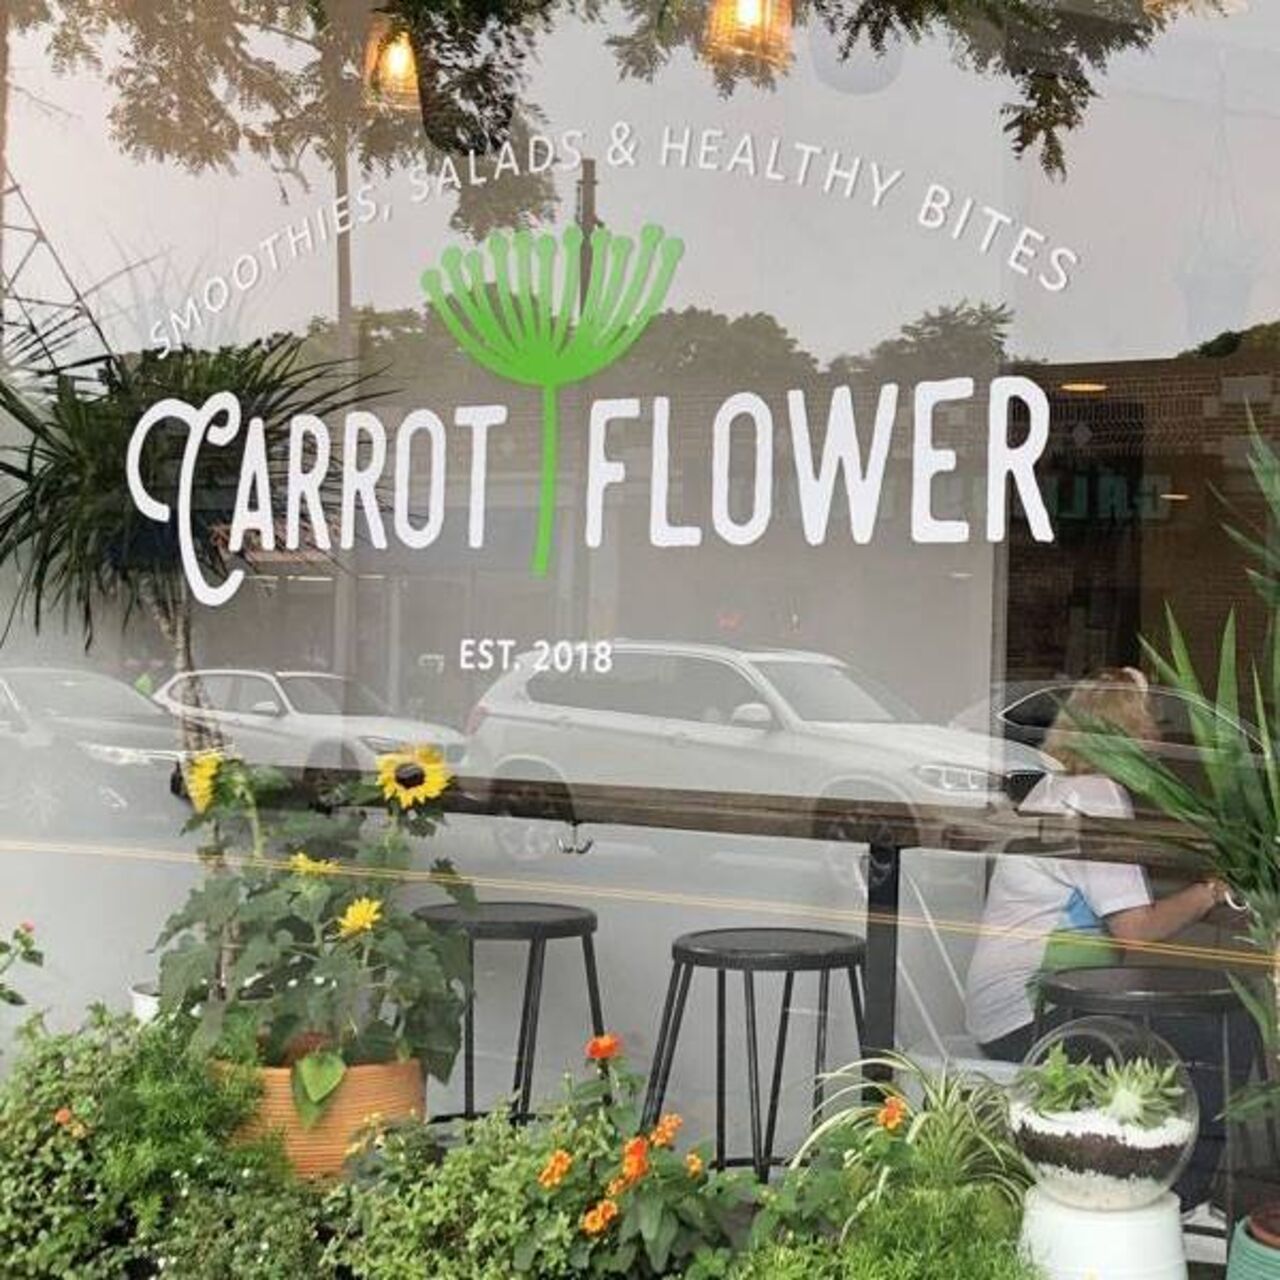 A photo of Carrot Flower